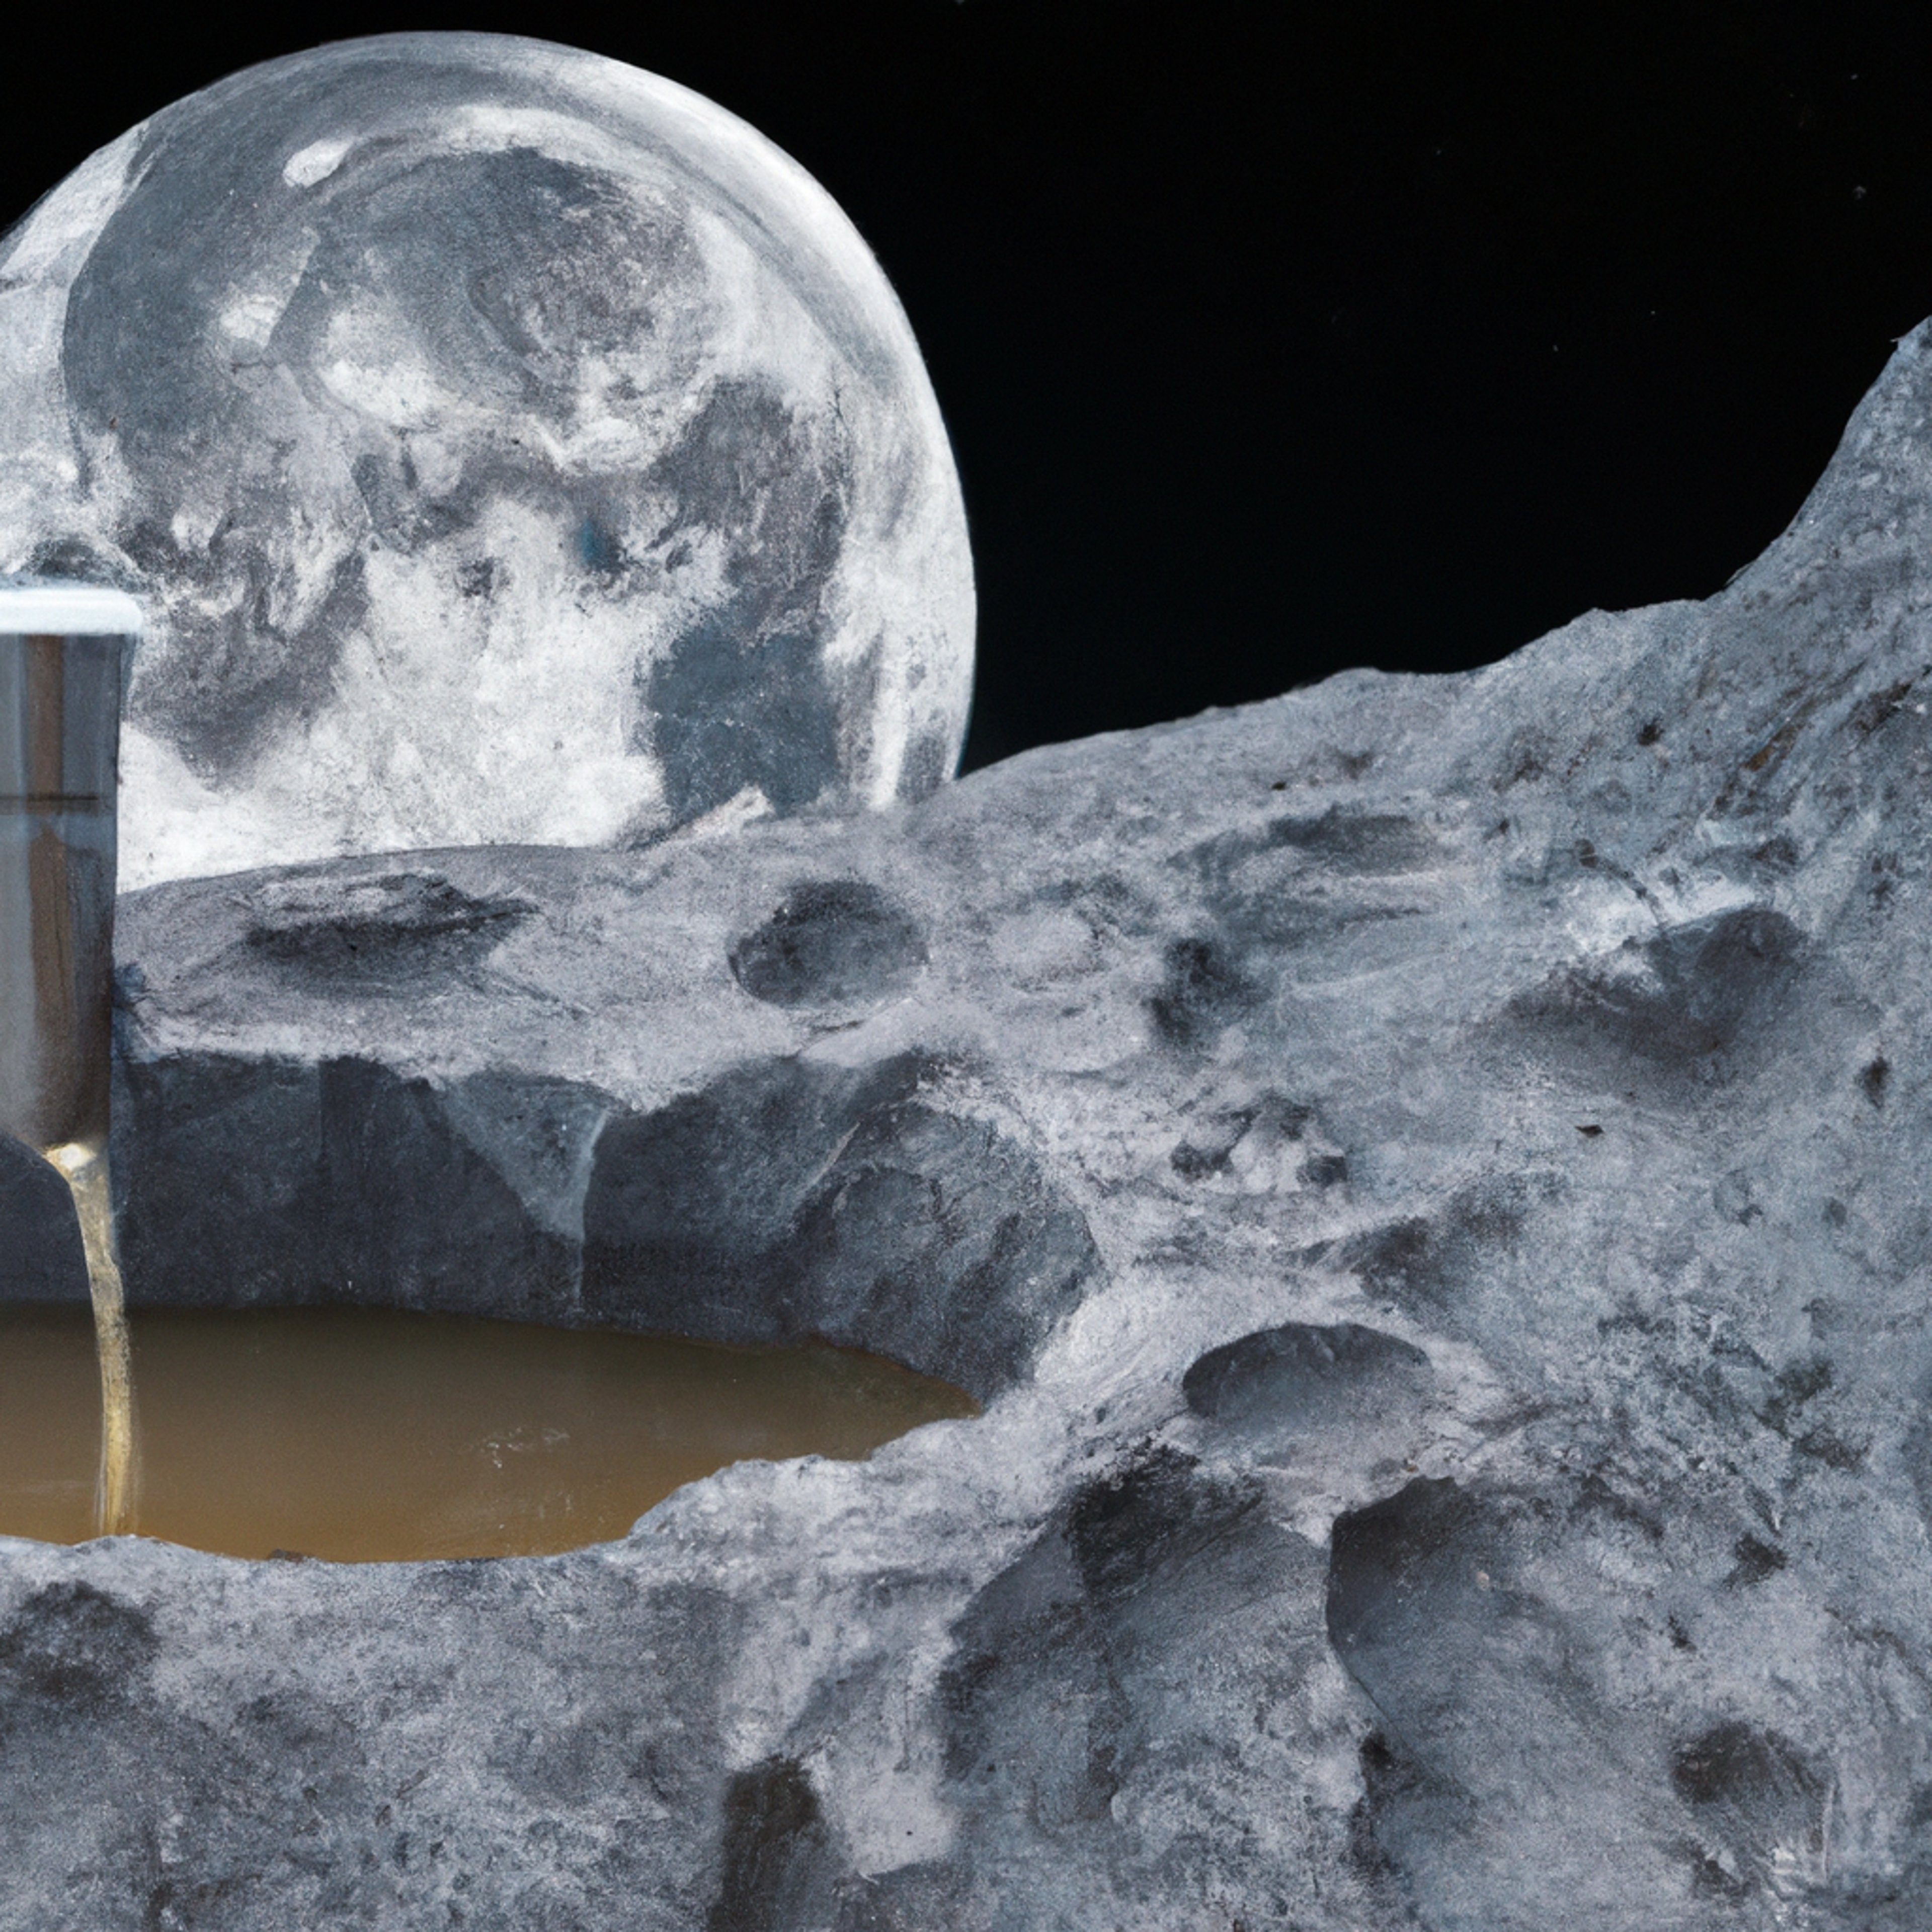 New Water Source Discovered on Moon from China Mission